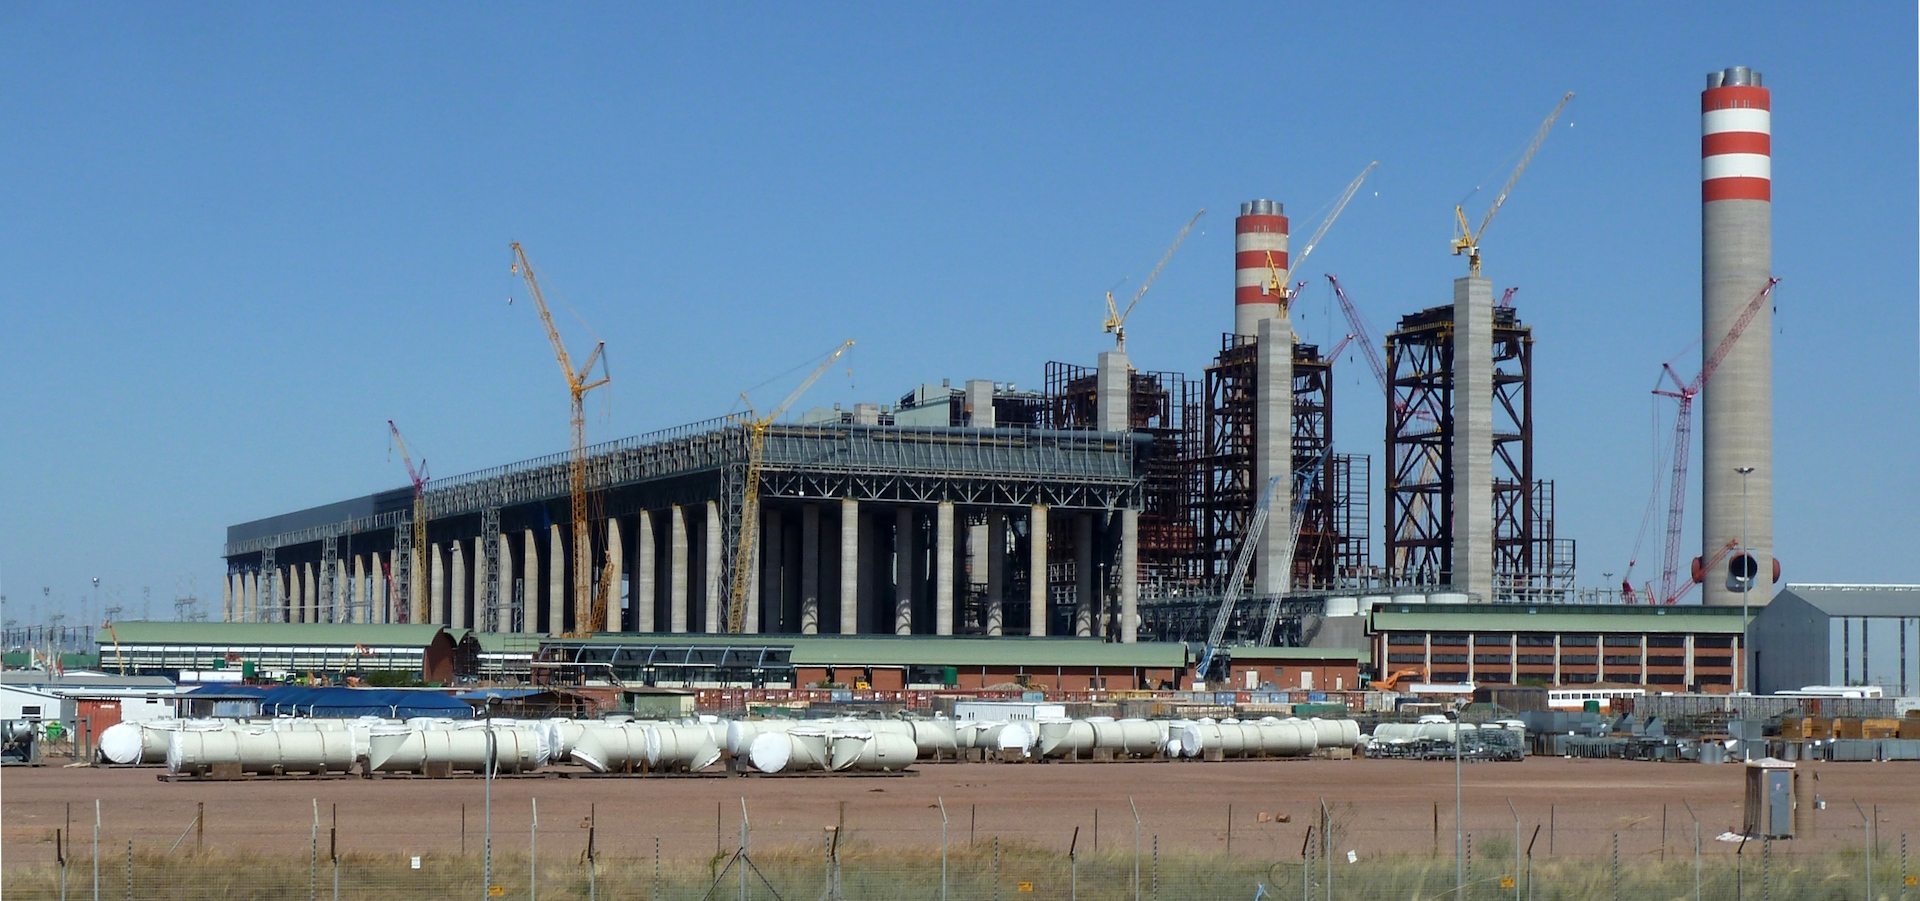 the coal plant at Limpopo in south Africa under construction